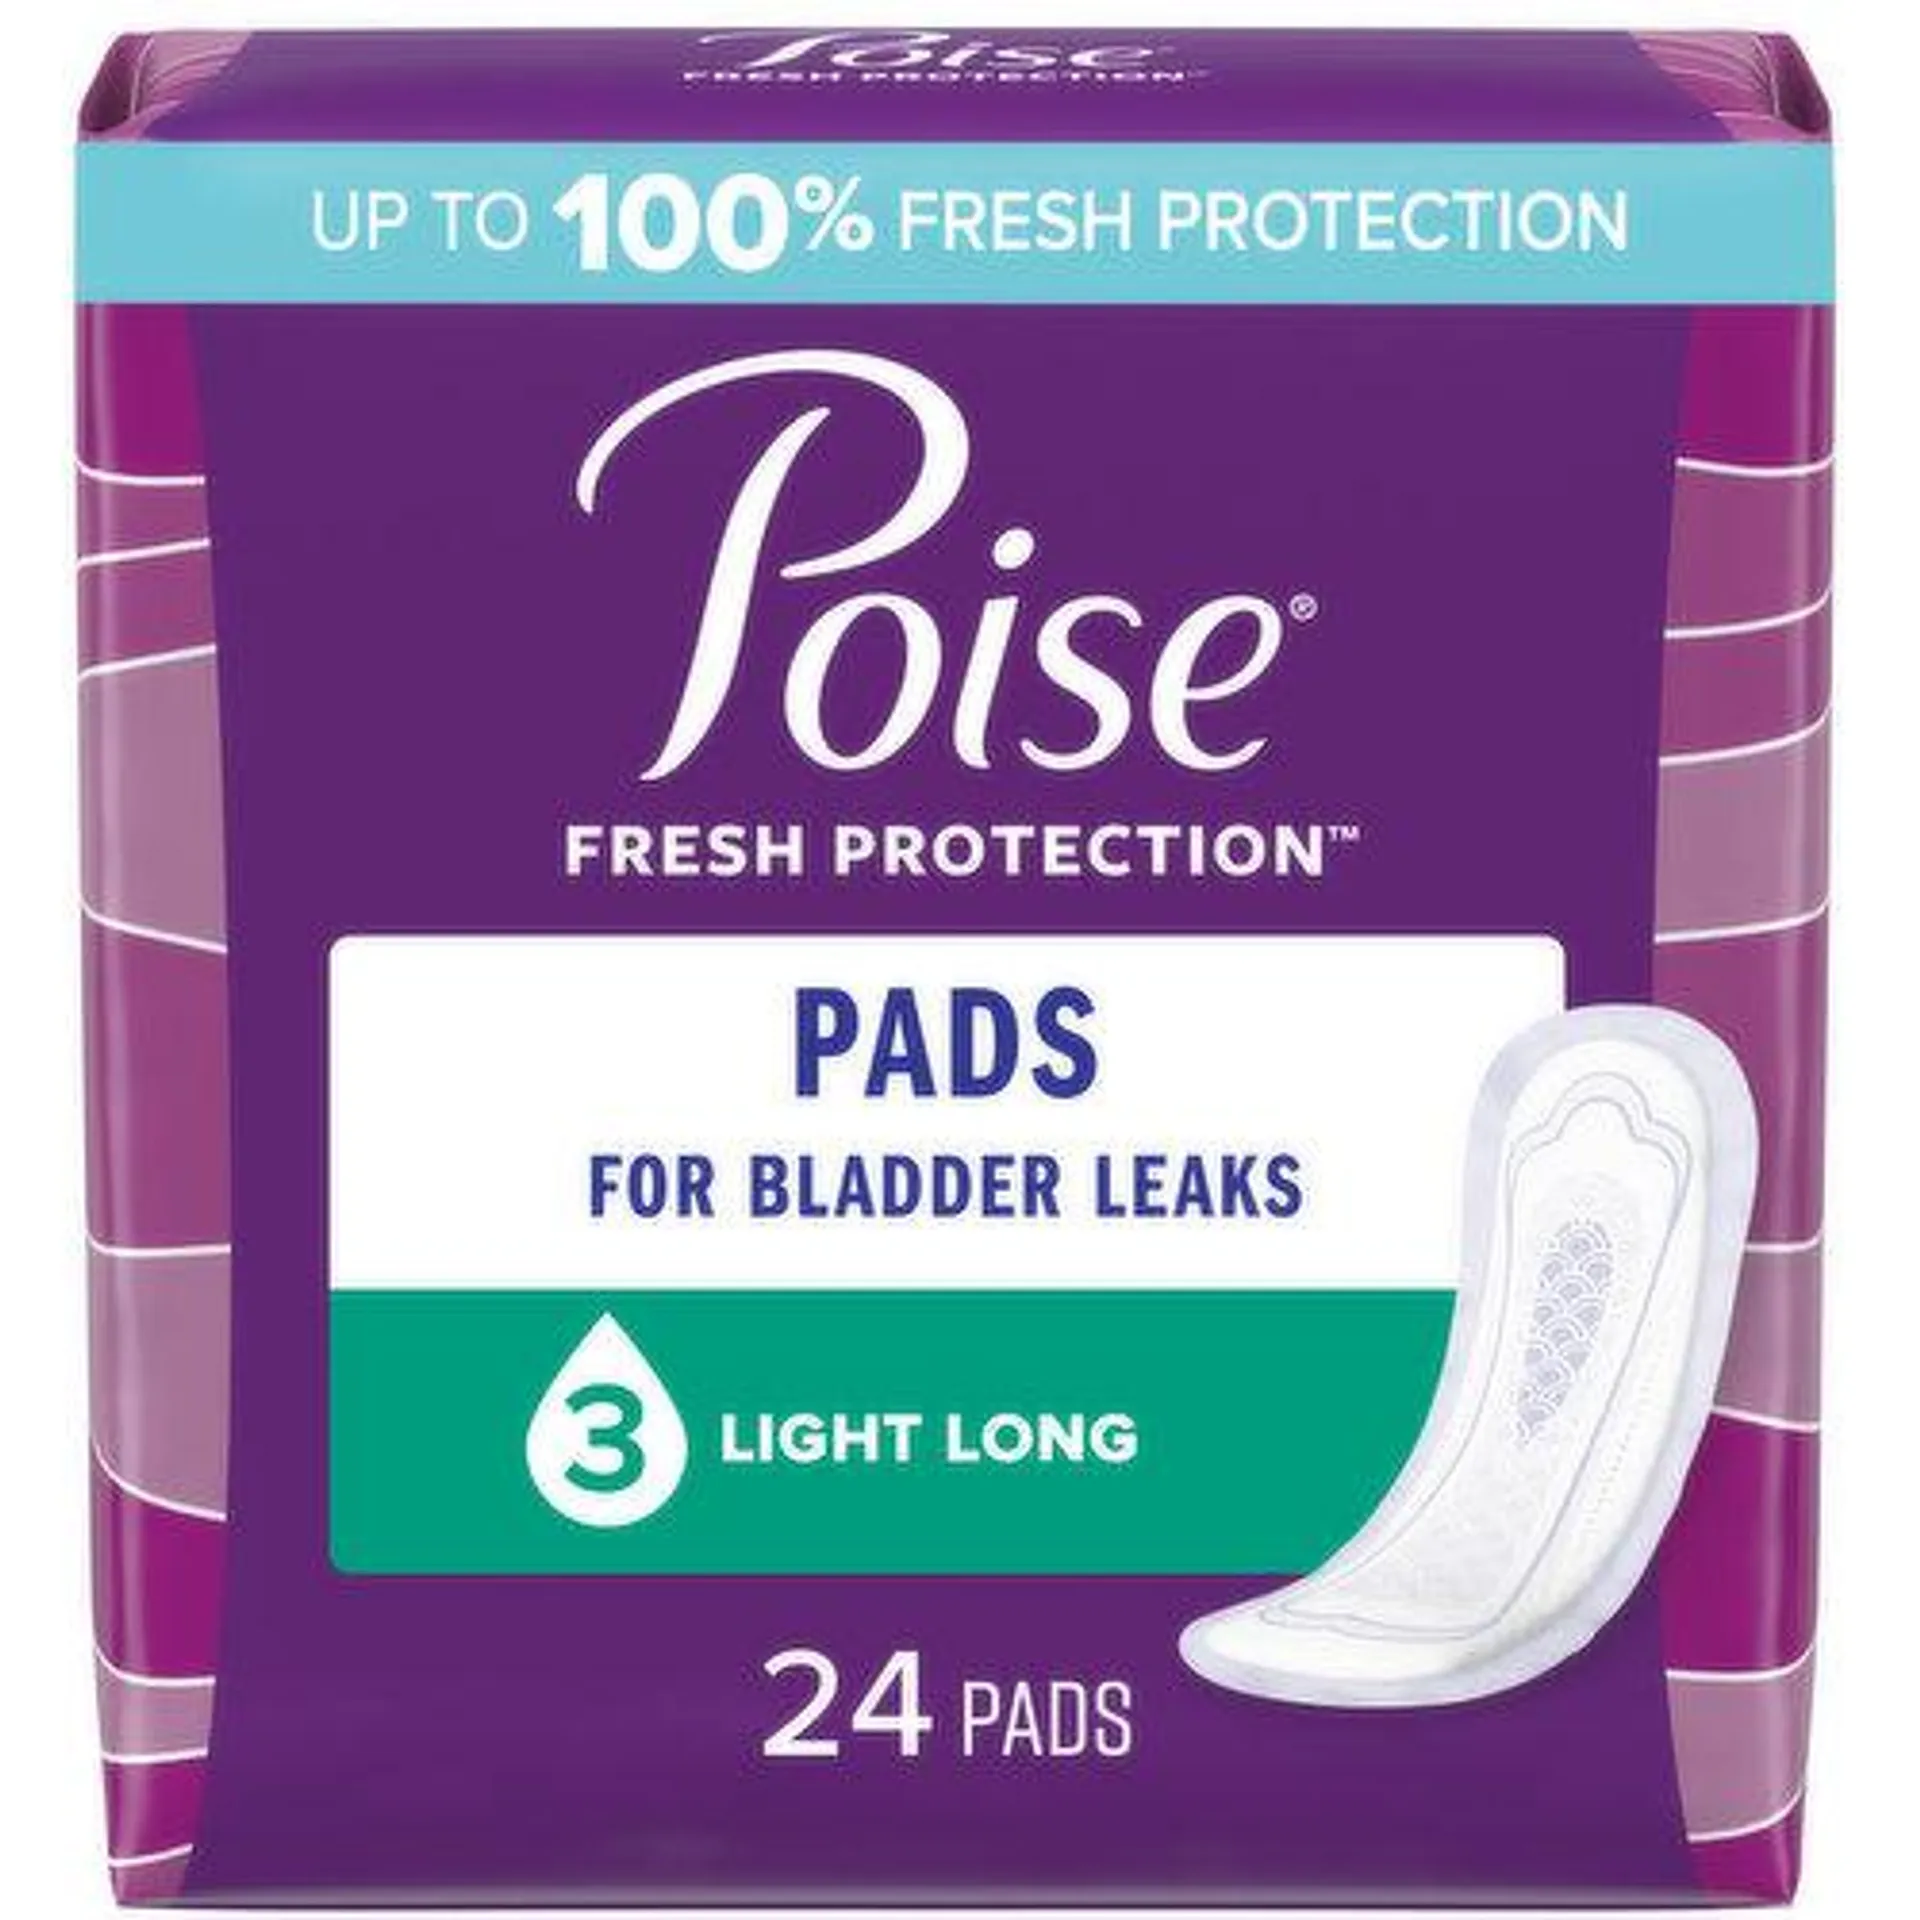 Poise Fresh Protection Pads, Light, Long, 24 Each